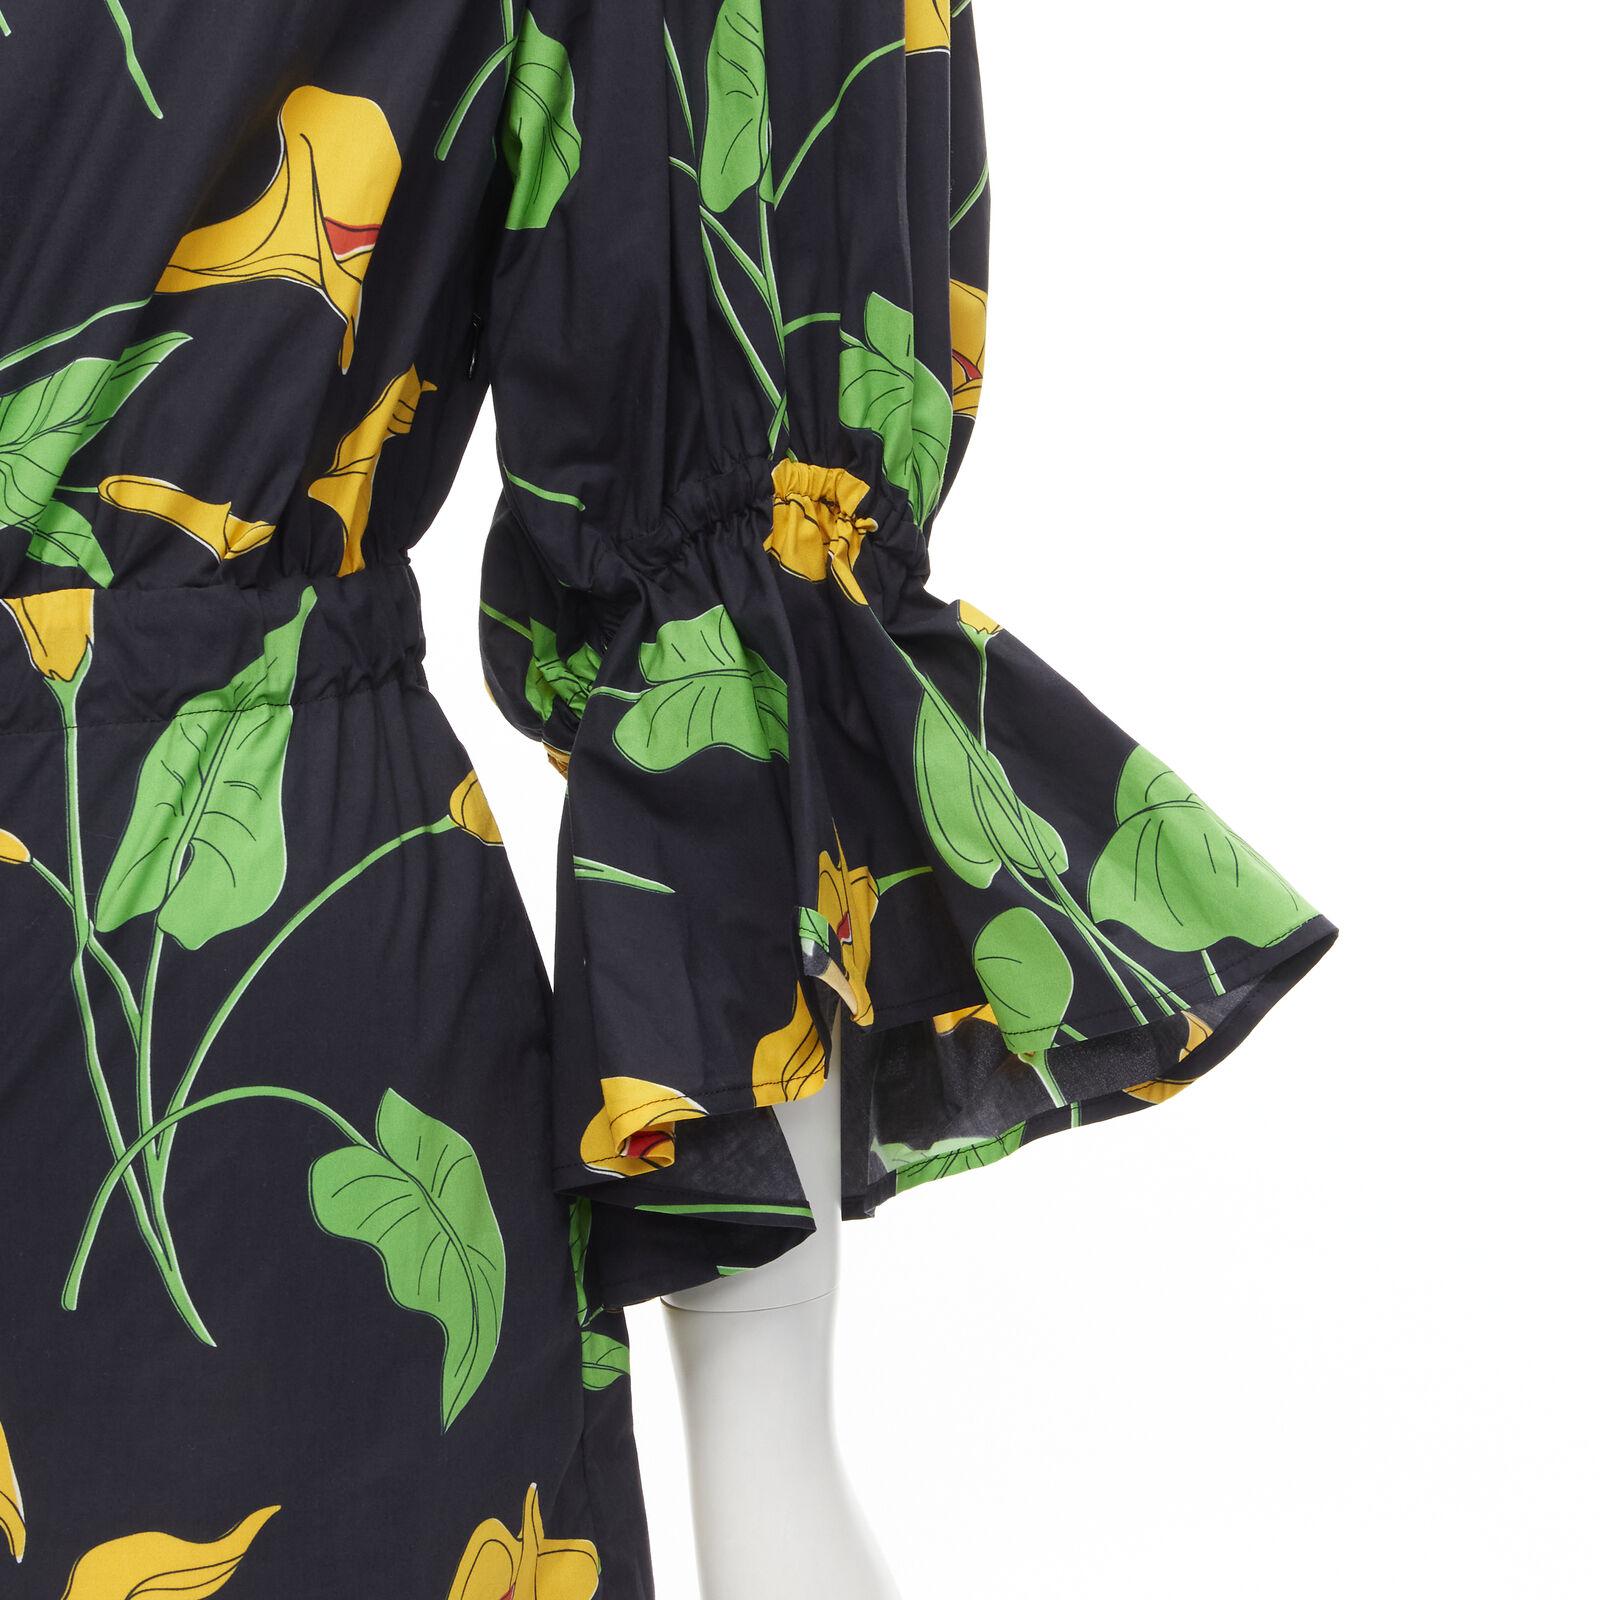 LE DOUBLE J Mantero black green yellow leaf print cotton flared cuff romper XS
Reference: AAWC/A00071
Brand: Le Double J
Collection: With Mantero
Material: Cotton
Color: Black, Yellow
Pattern: Abstract
Closure: Elasticated
Lining: Unlined
Extra